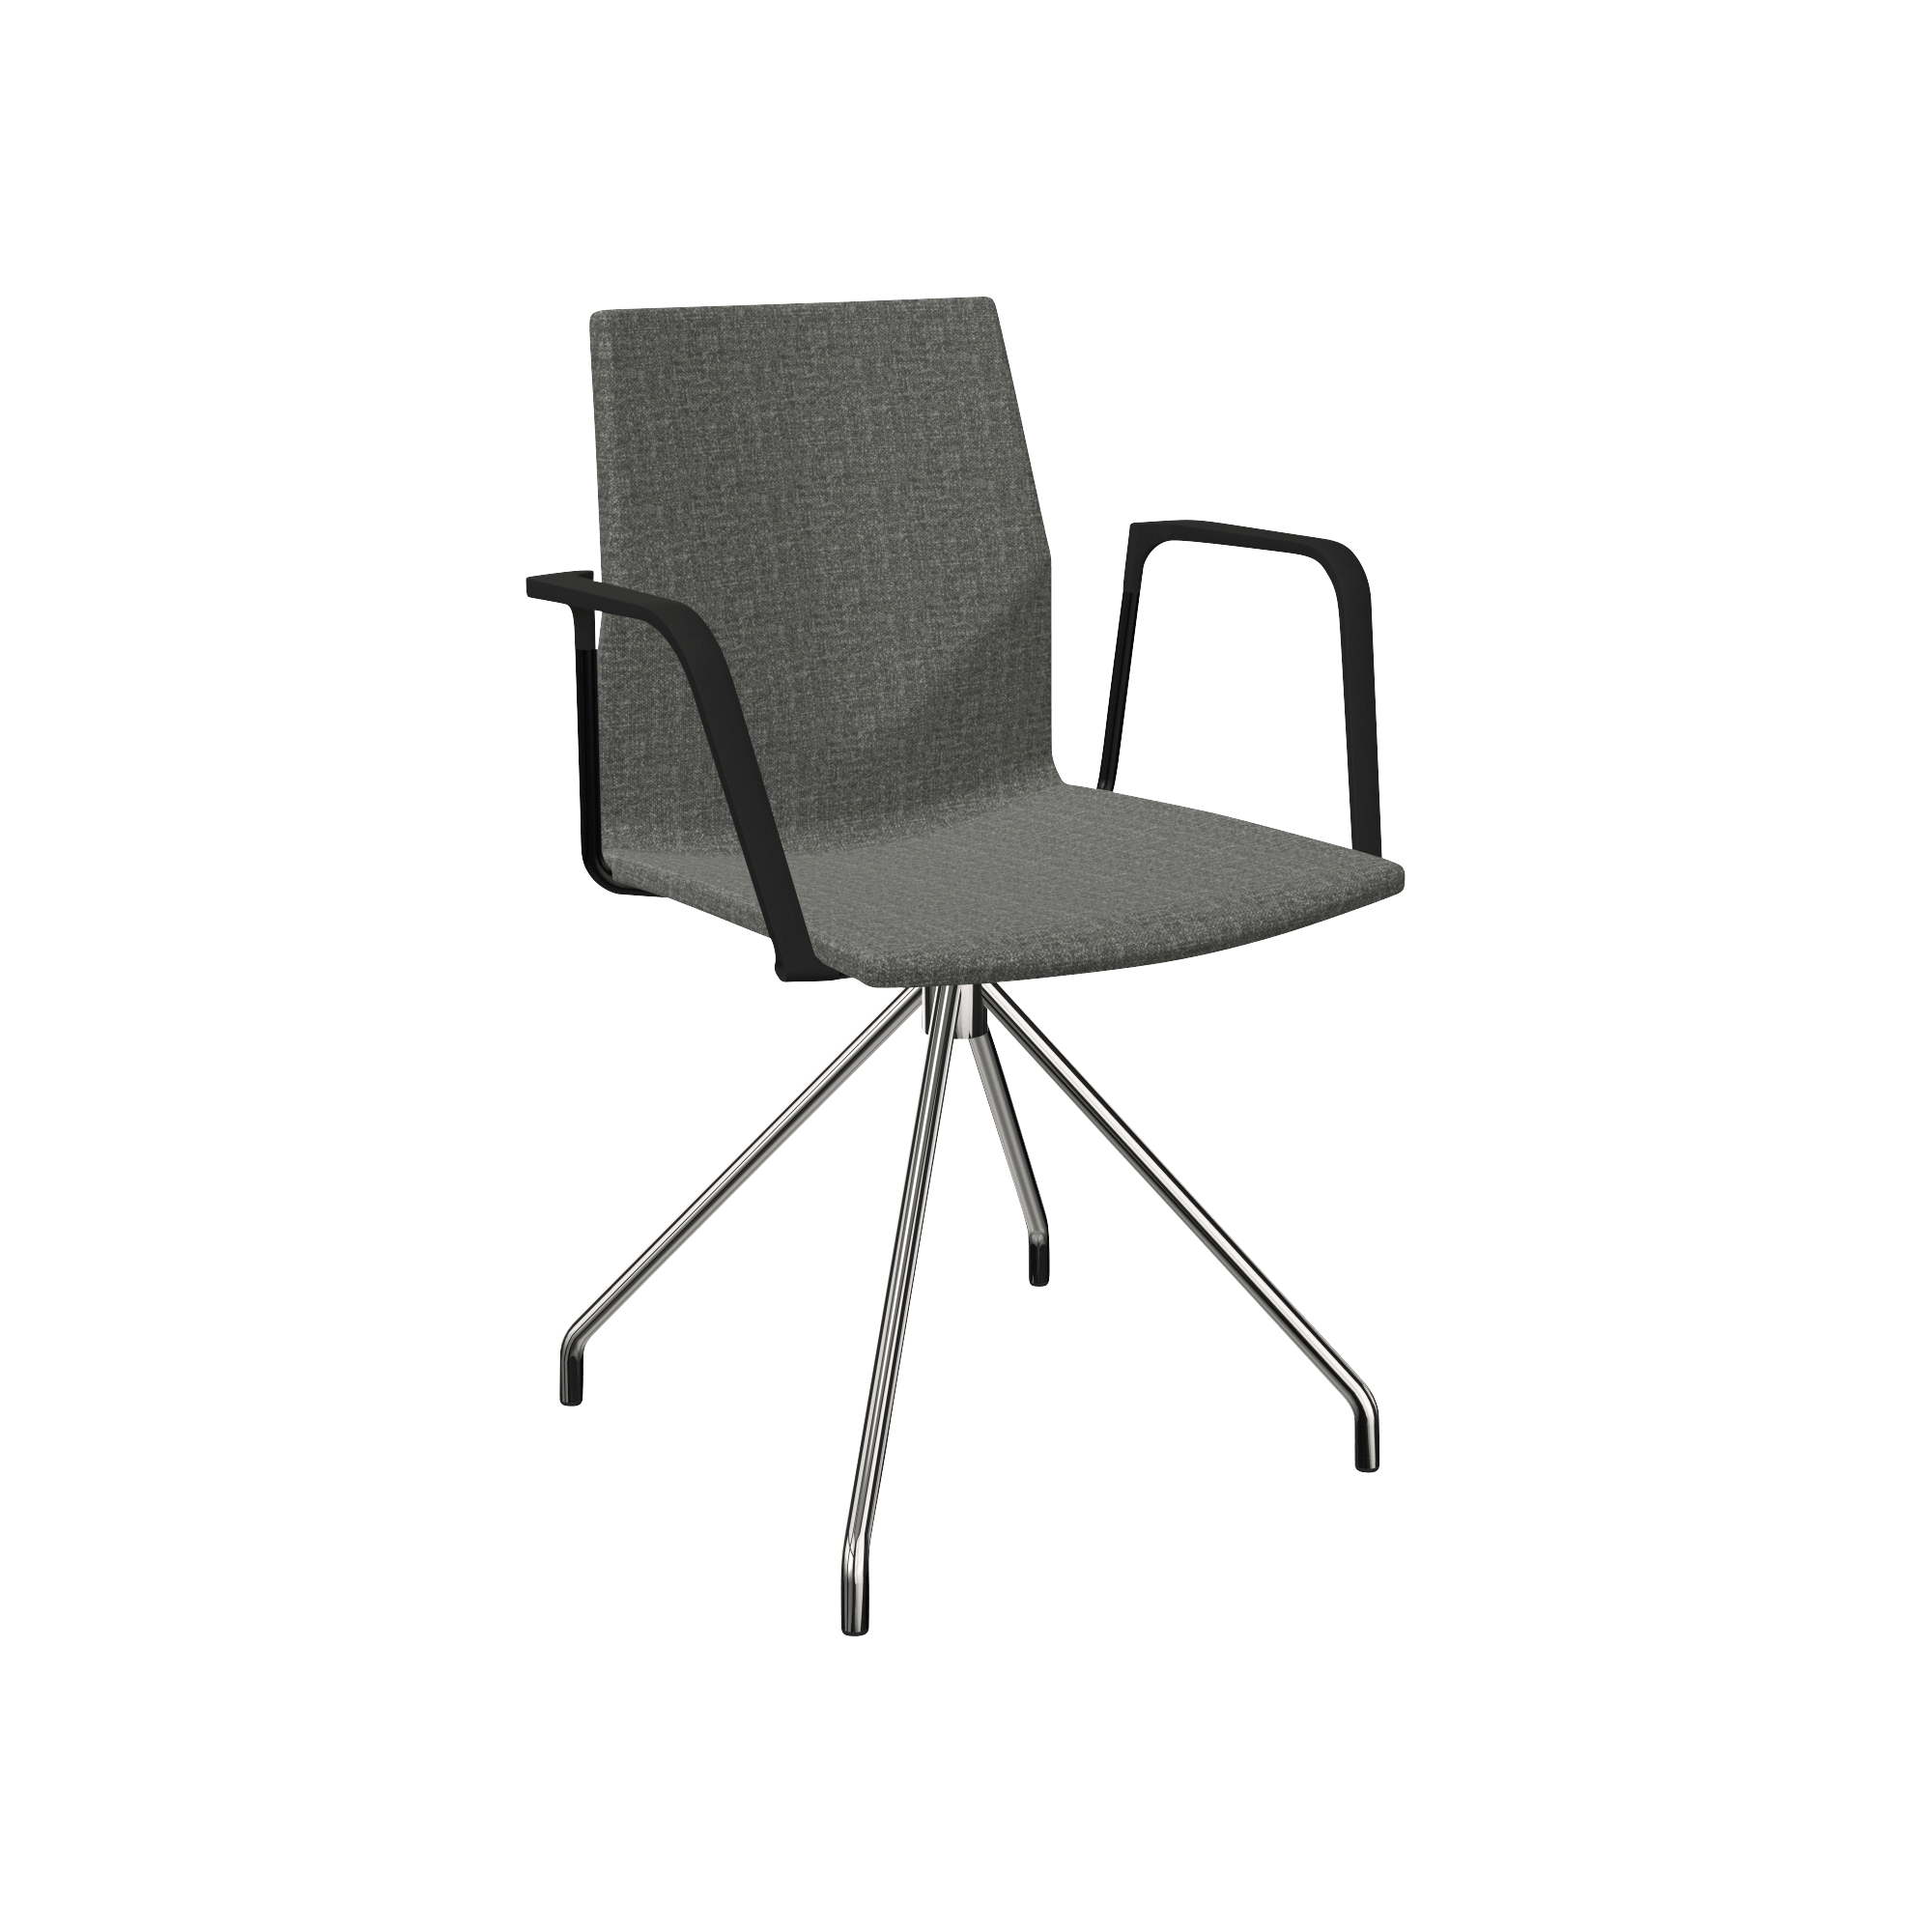 A grey chair with metal legs.